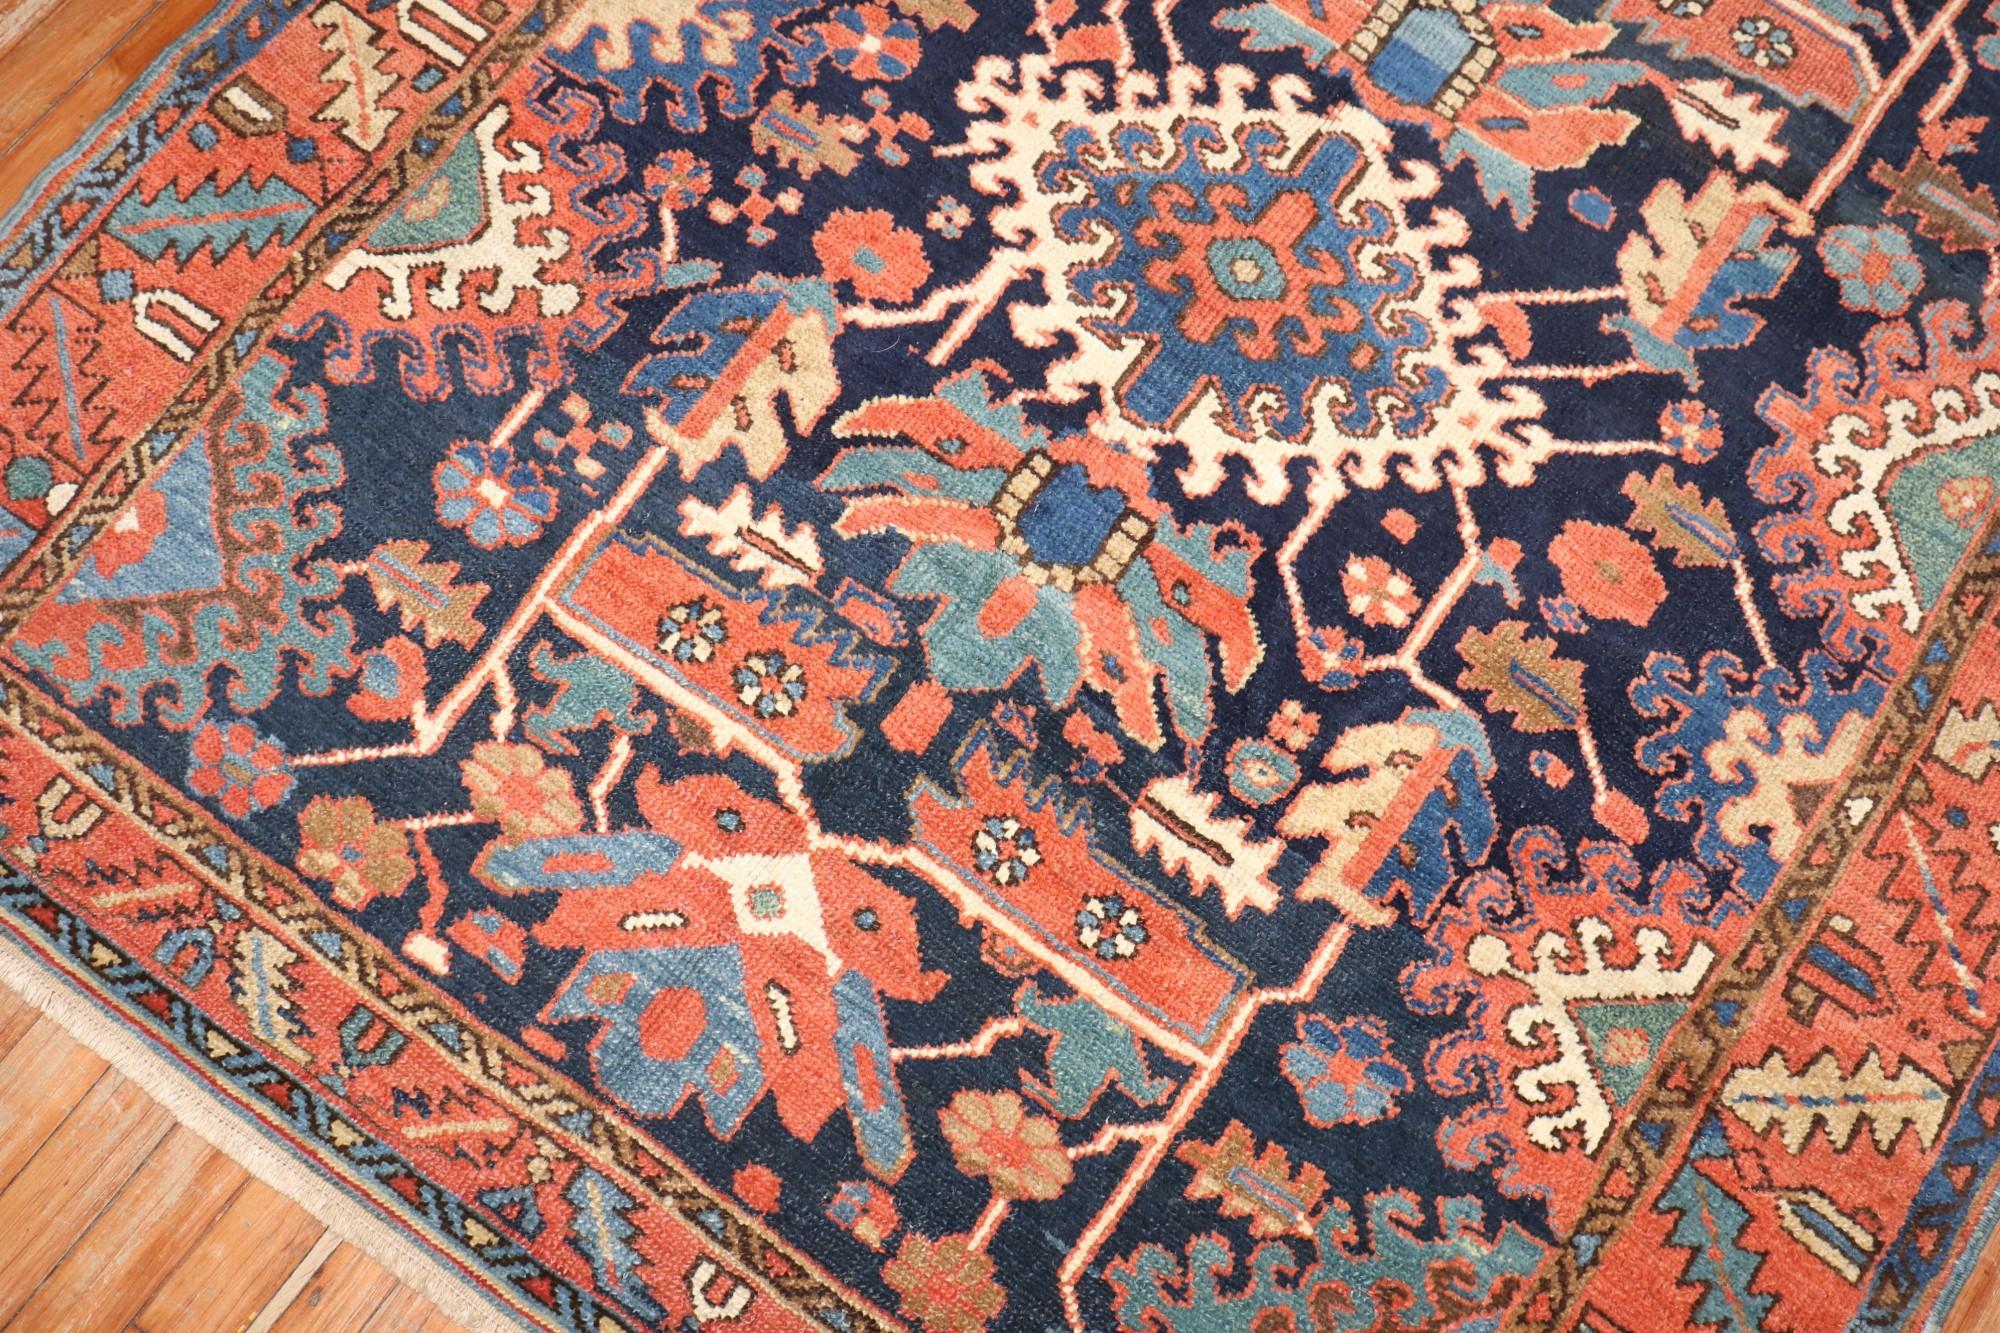 An early 20th century traditional navy blue field Persian Heriz carpet with a geometric all over design.

Measures: 5'x 5'8